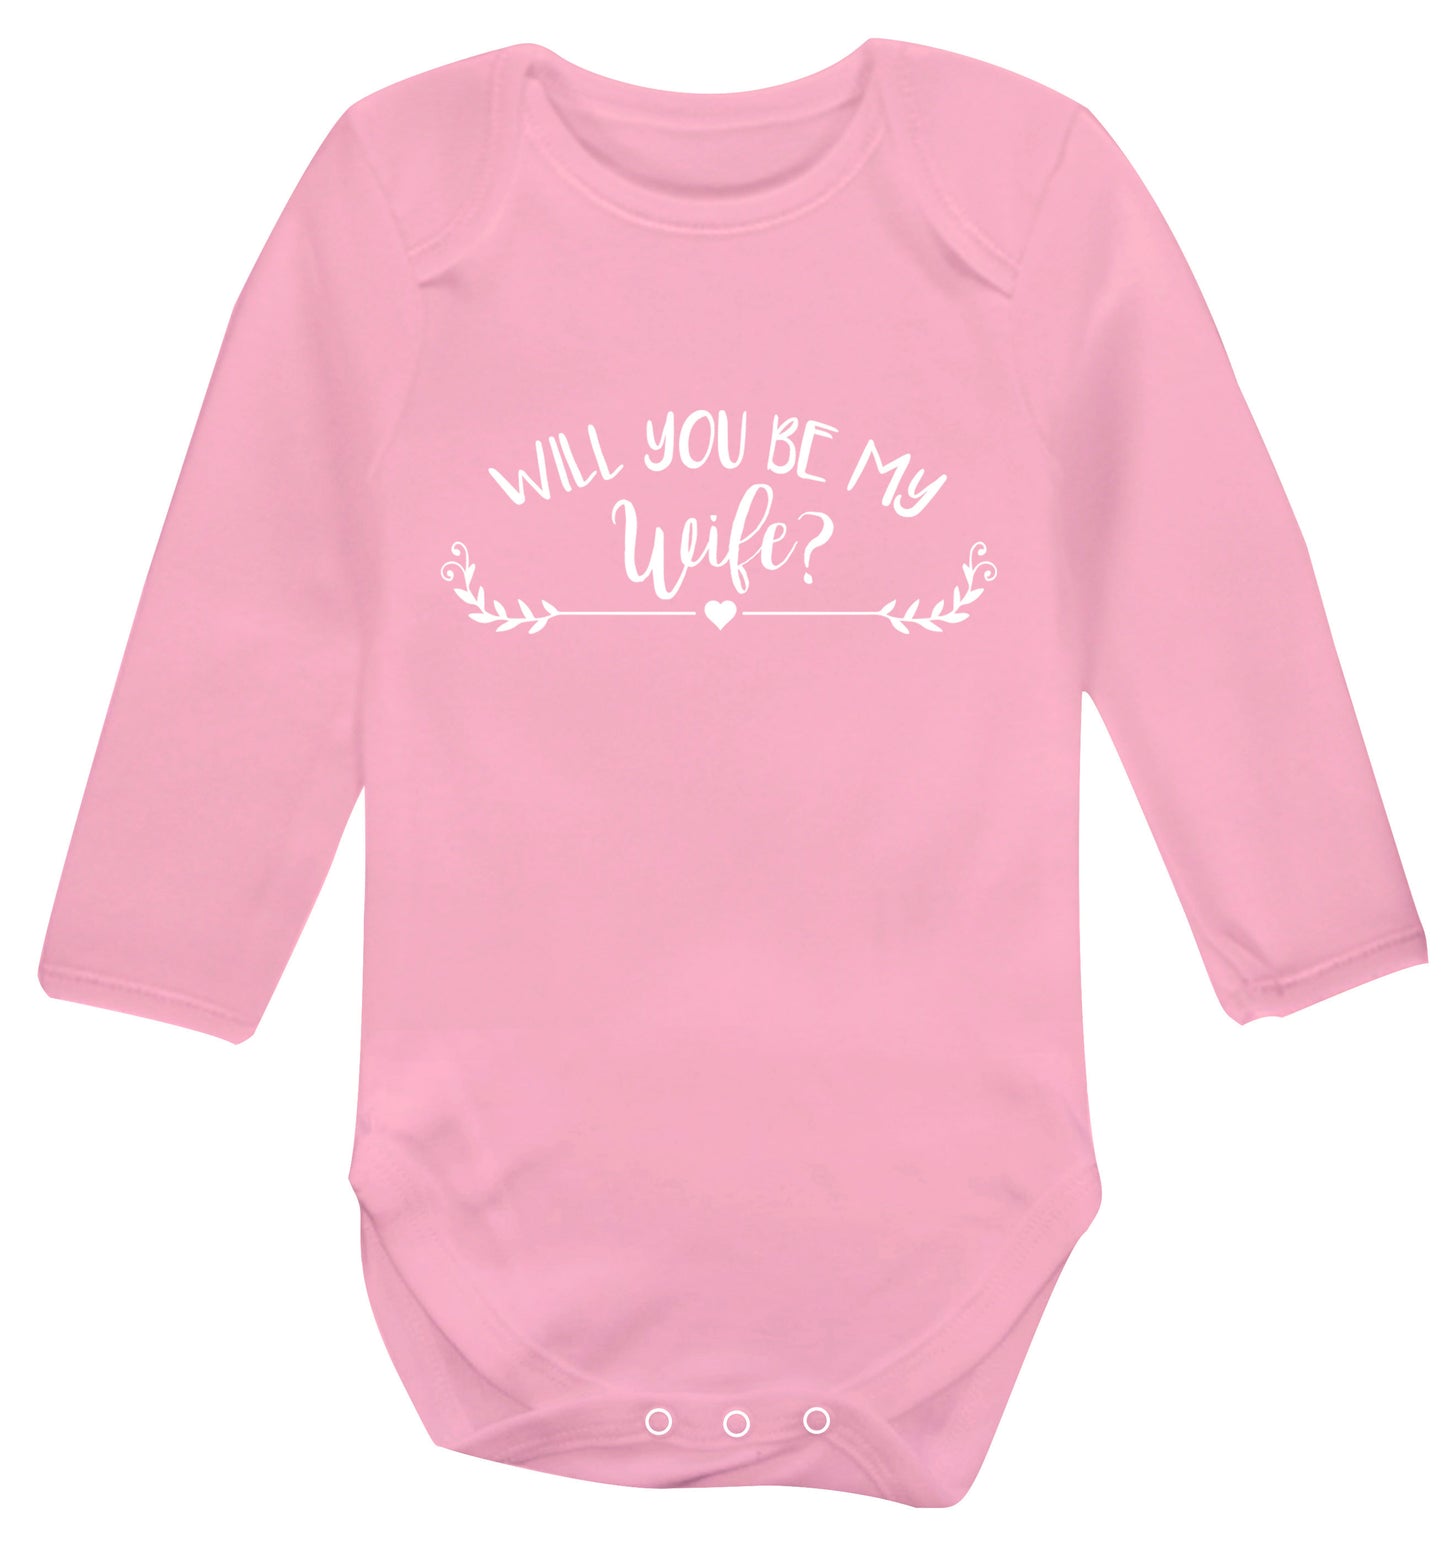 Will you be my wife? Baby Vest long sleeved pale pink 6-12 months